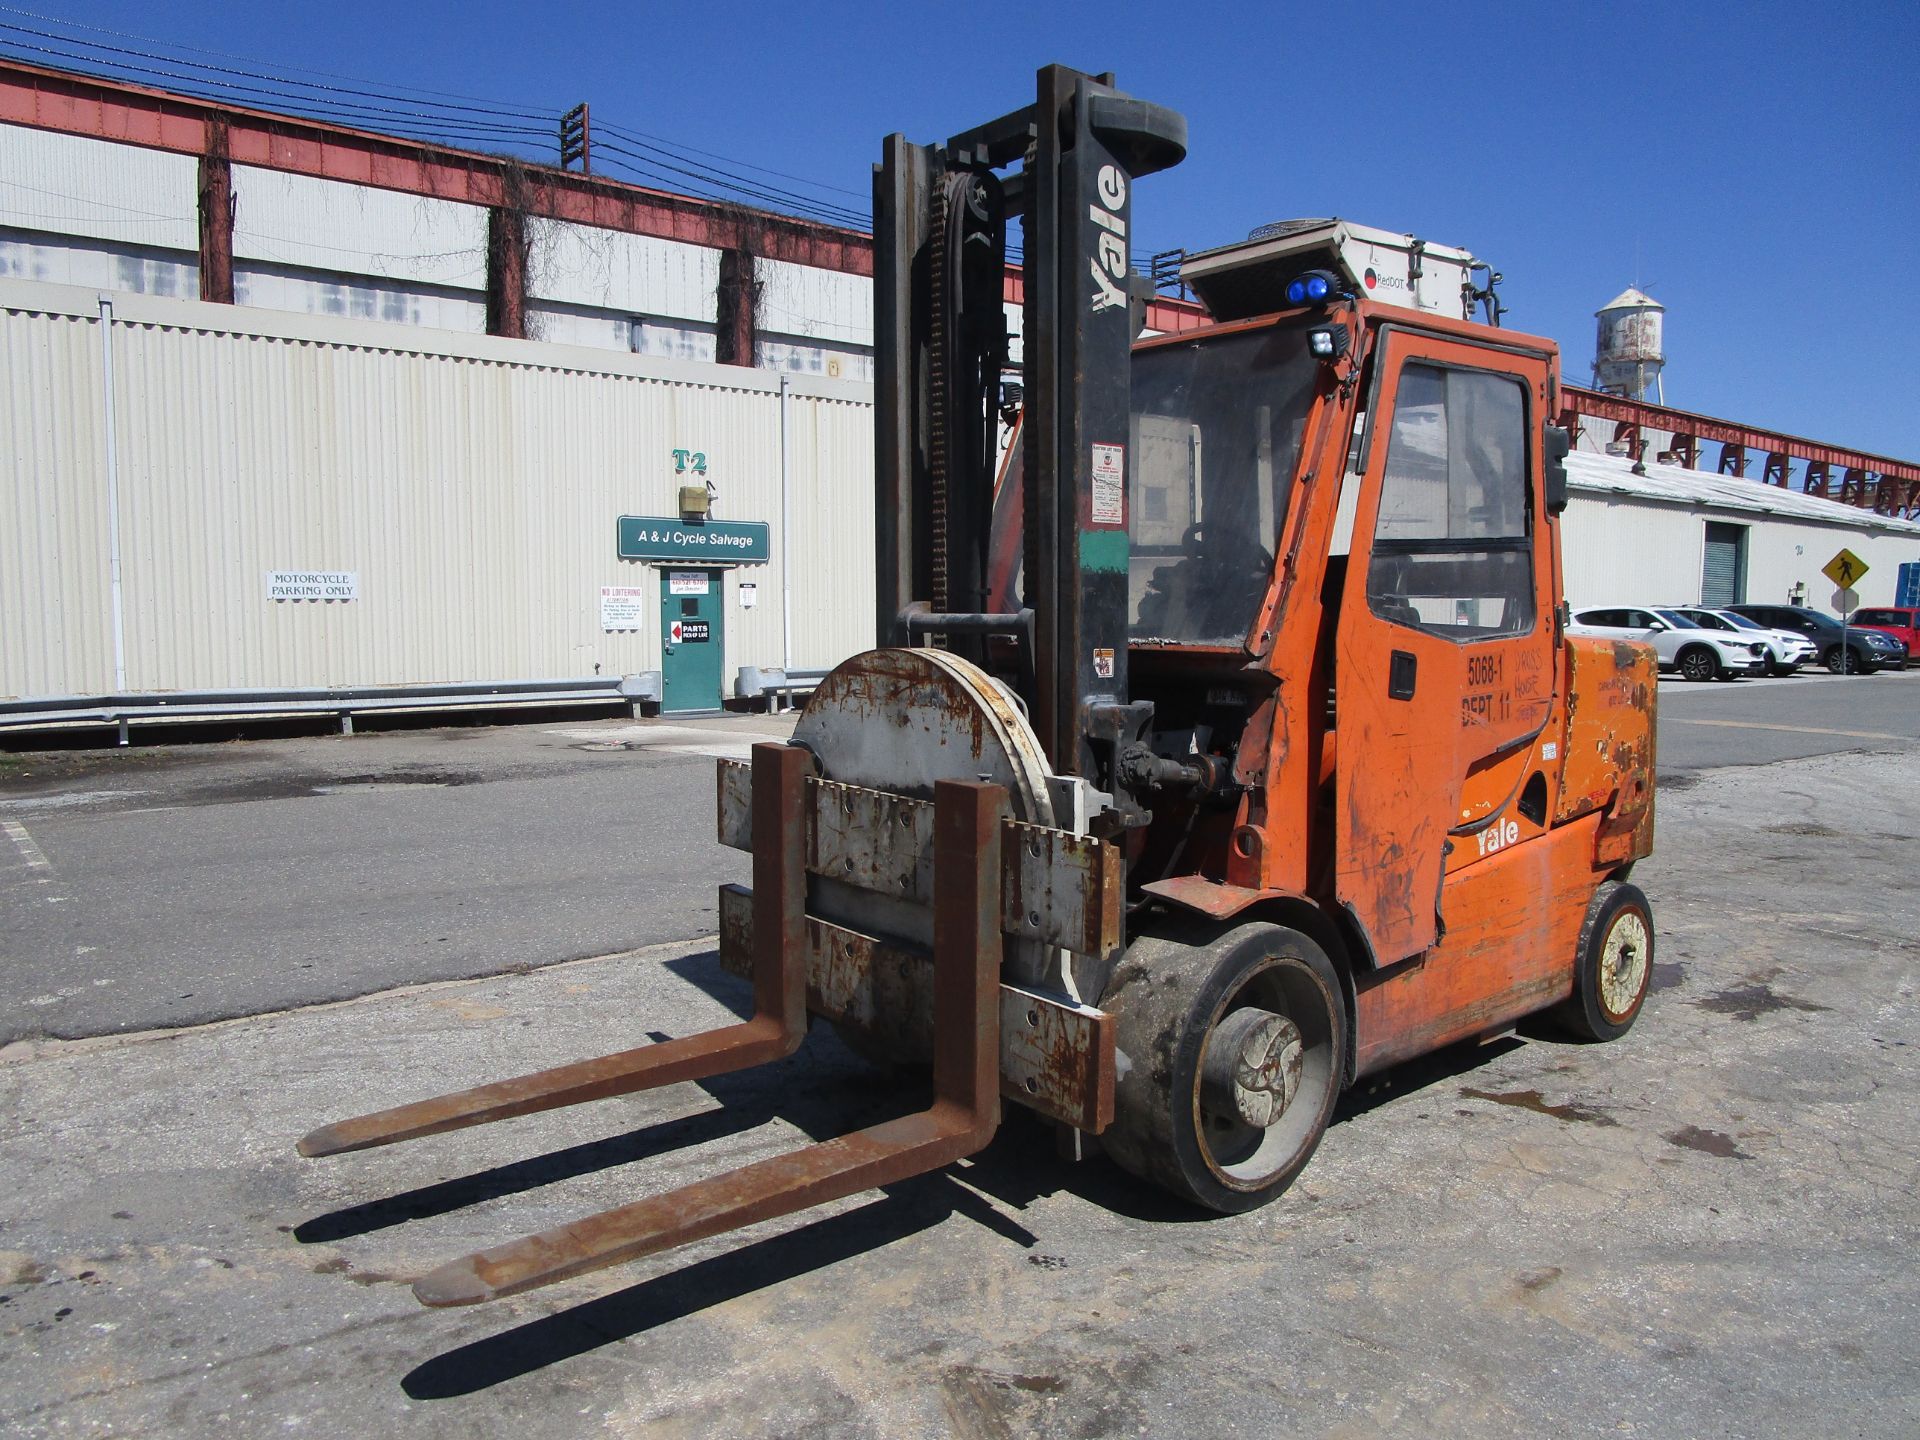 2015 Yale GDC155VX 15,500lb Forklift - Located in Lester, PA - Image 3 of 8